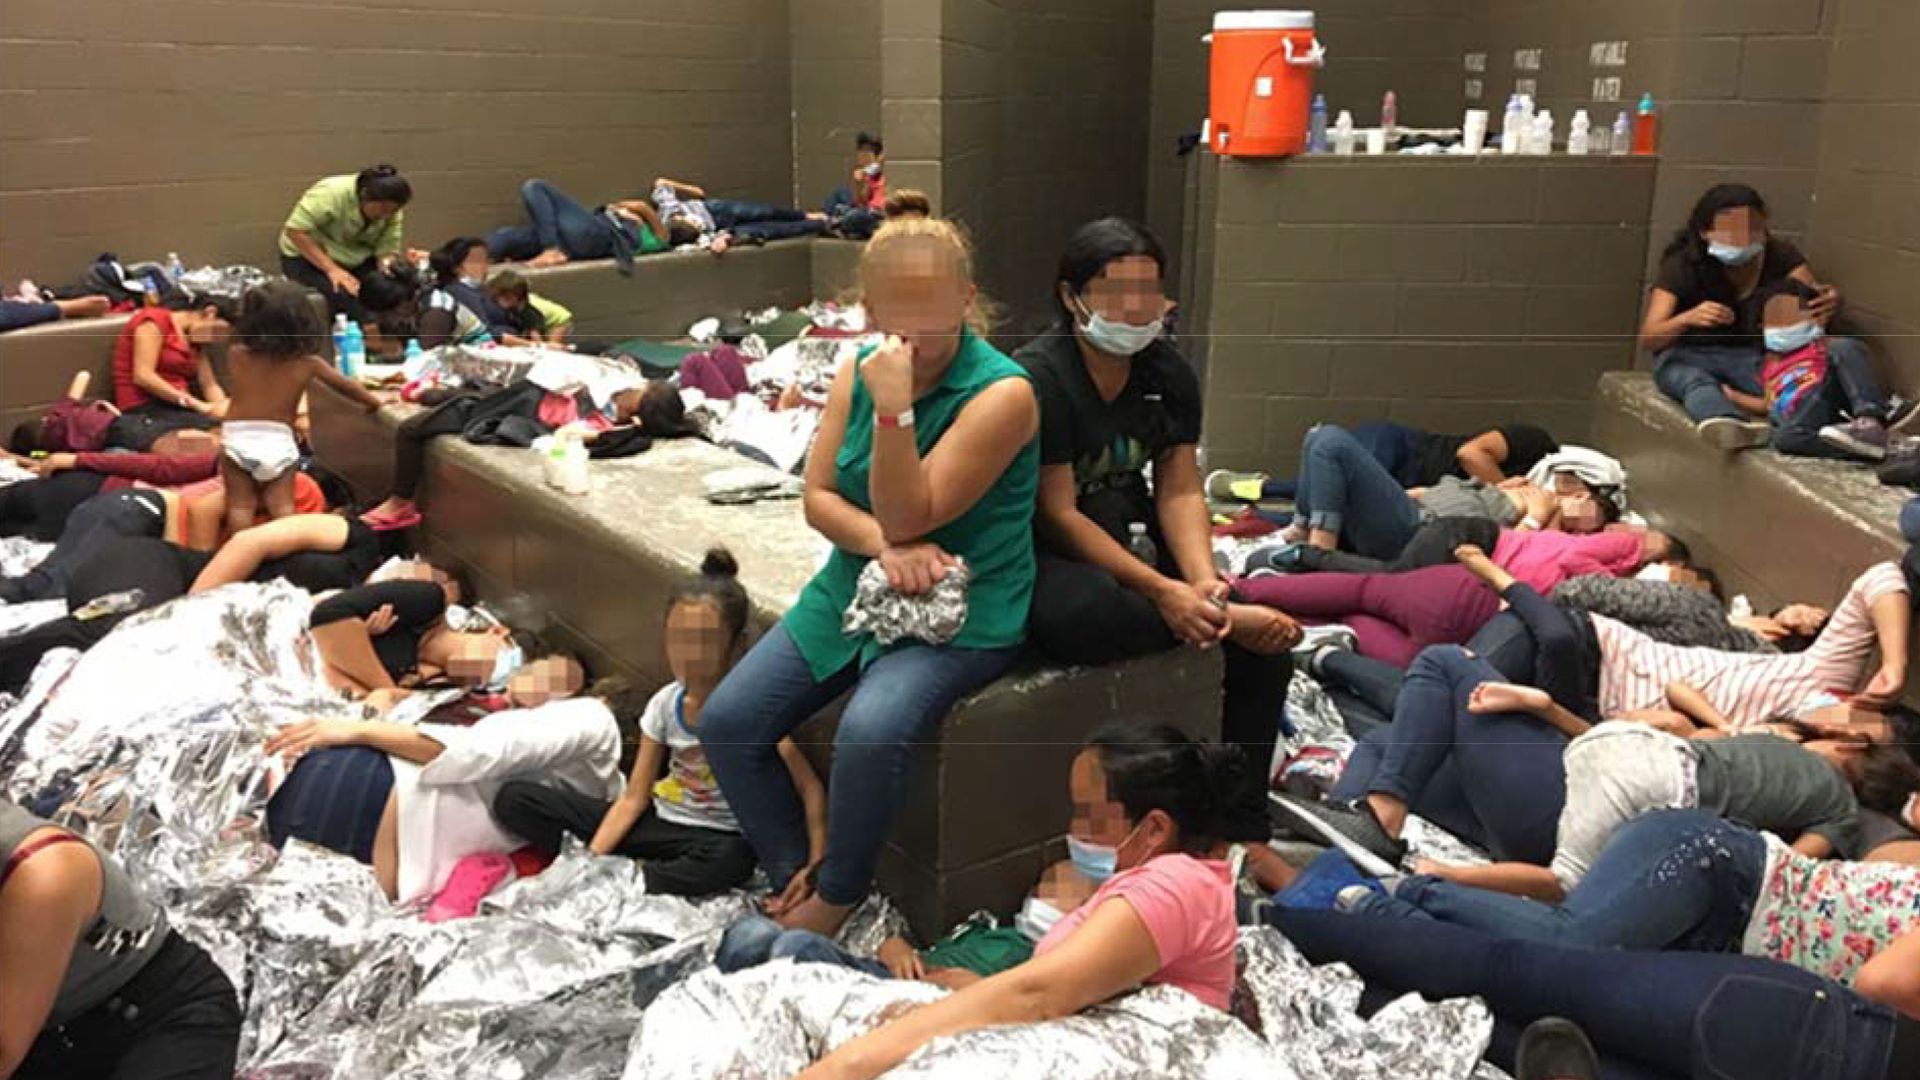 Women and child migrants crammed into a detention cell with aluminum blankets and blurred out faces. 